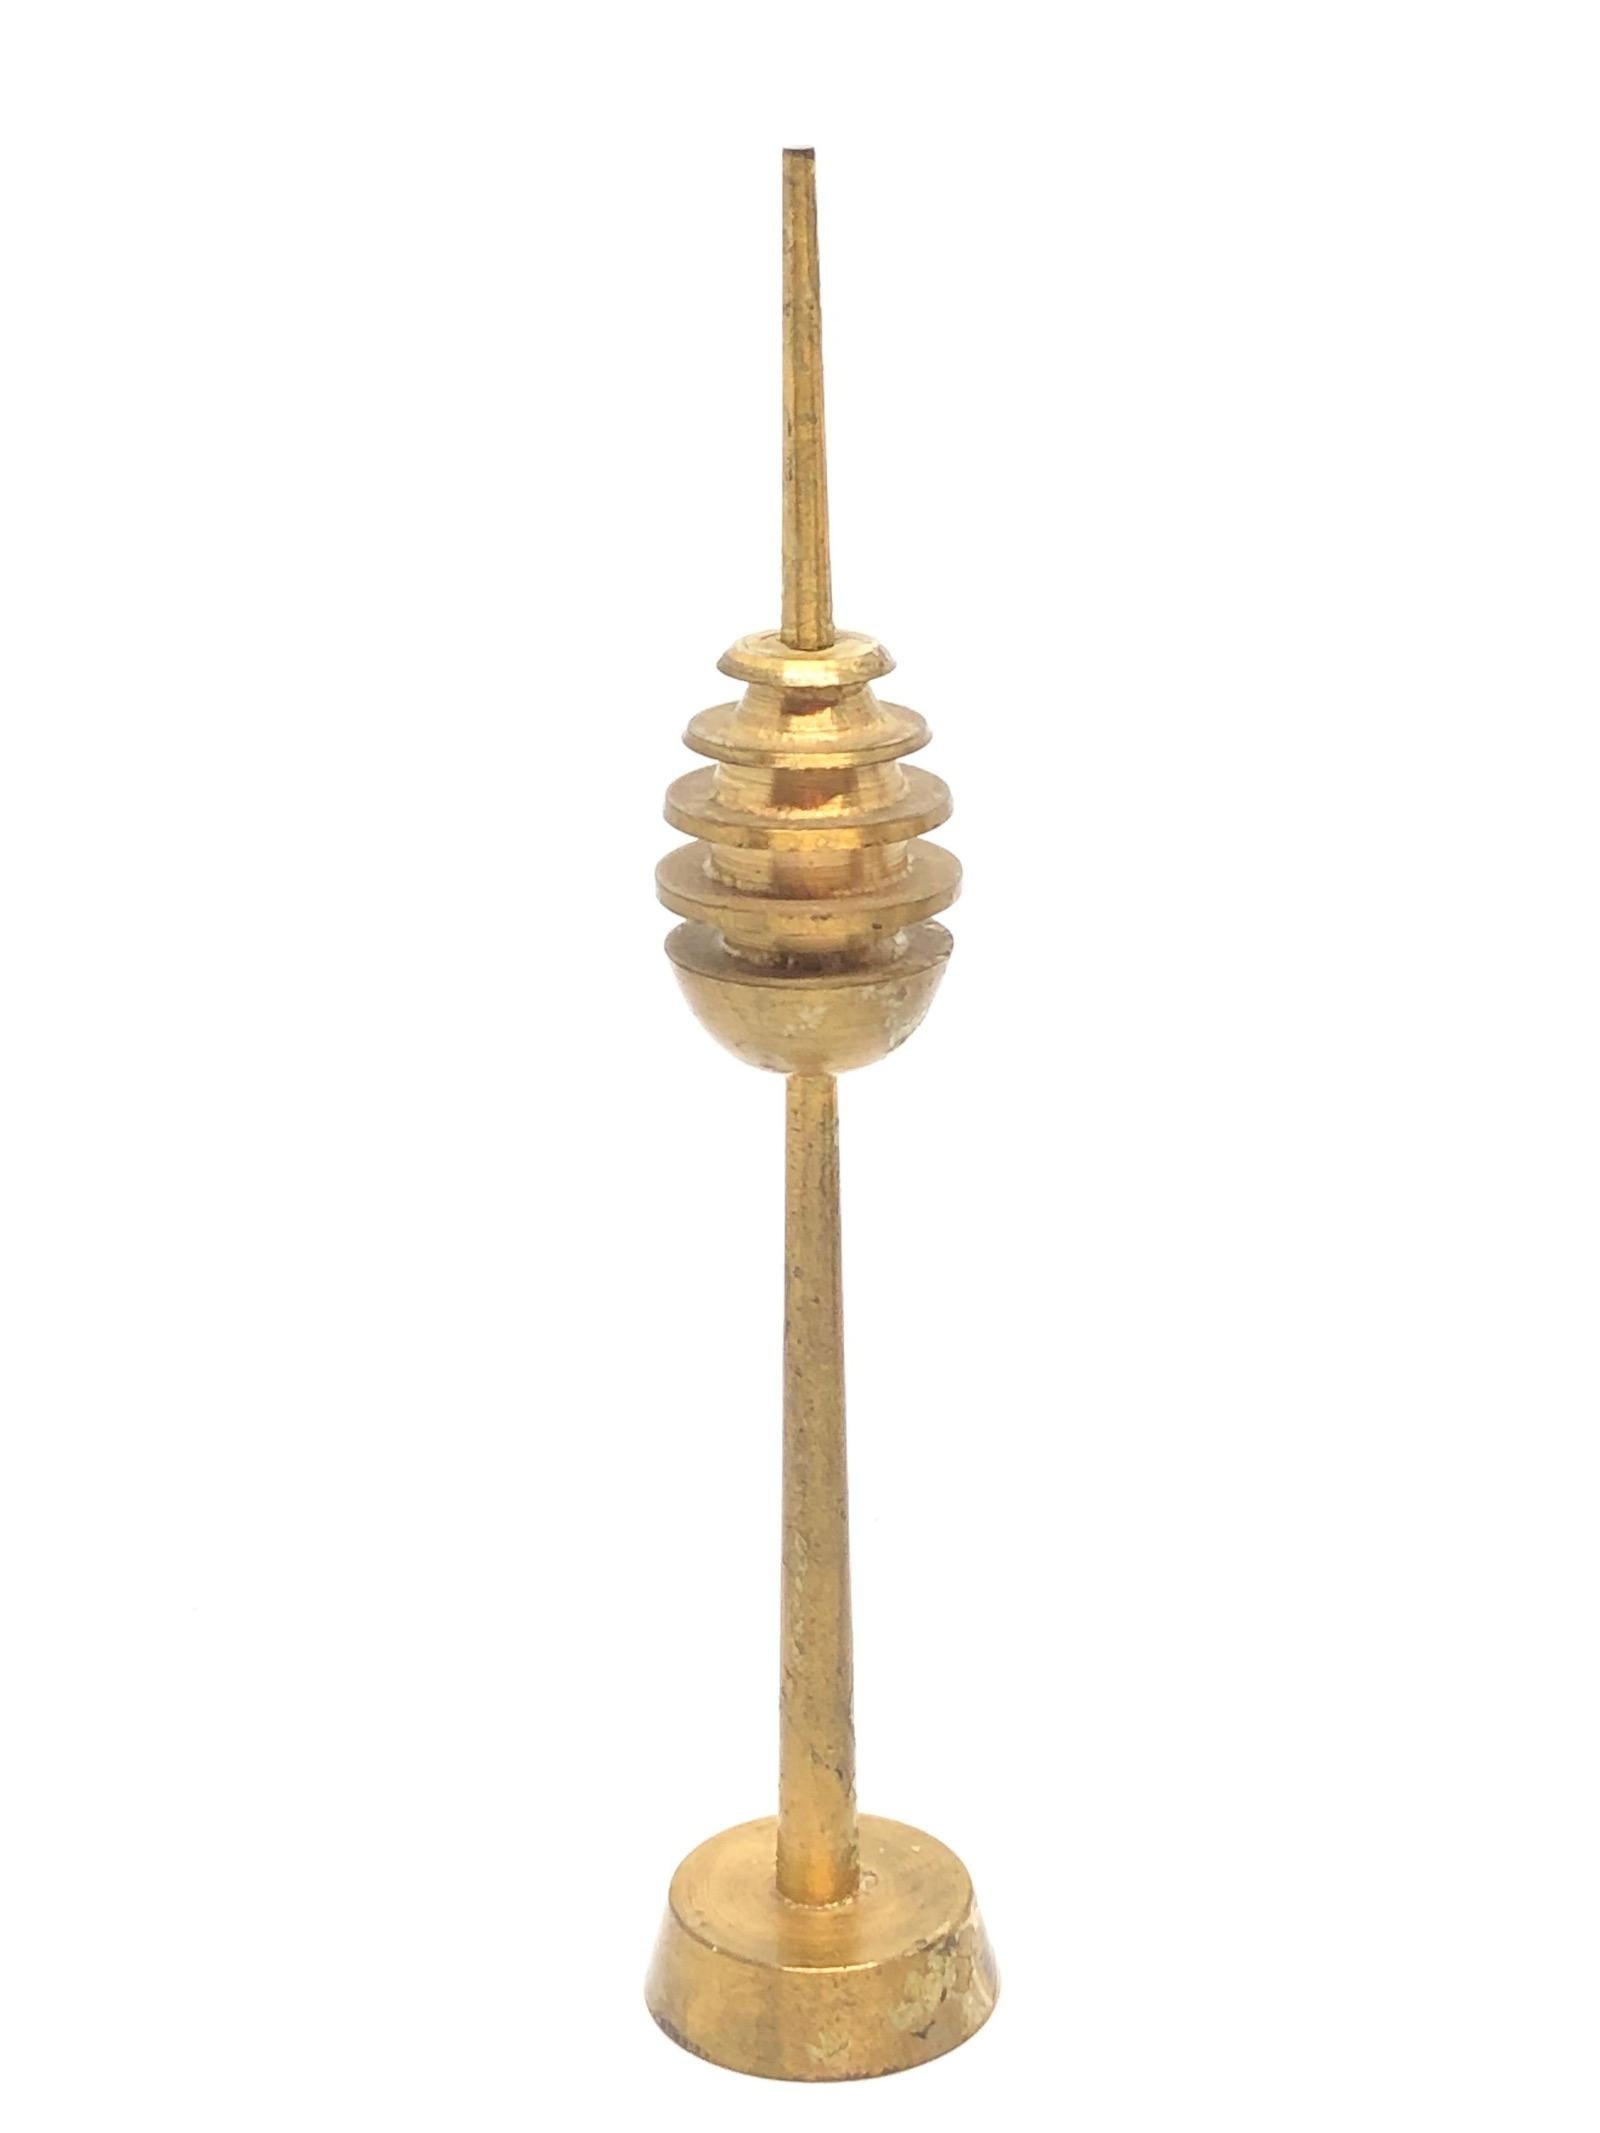 Scaled model of the Nuremberg television tower. Hand-spun in brass. A nice architectural sculpture for every living or man’s room.